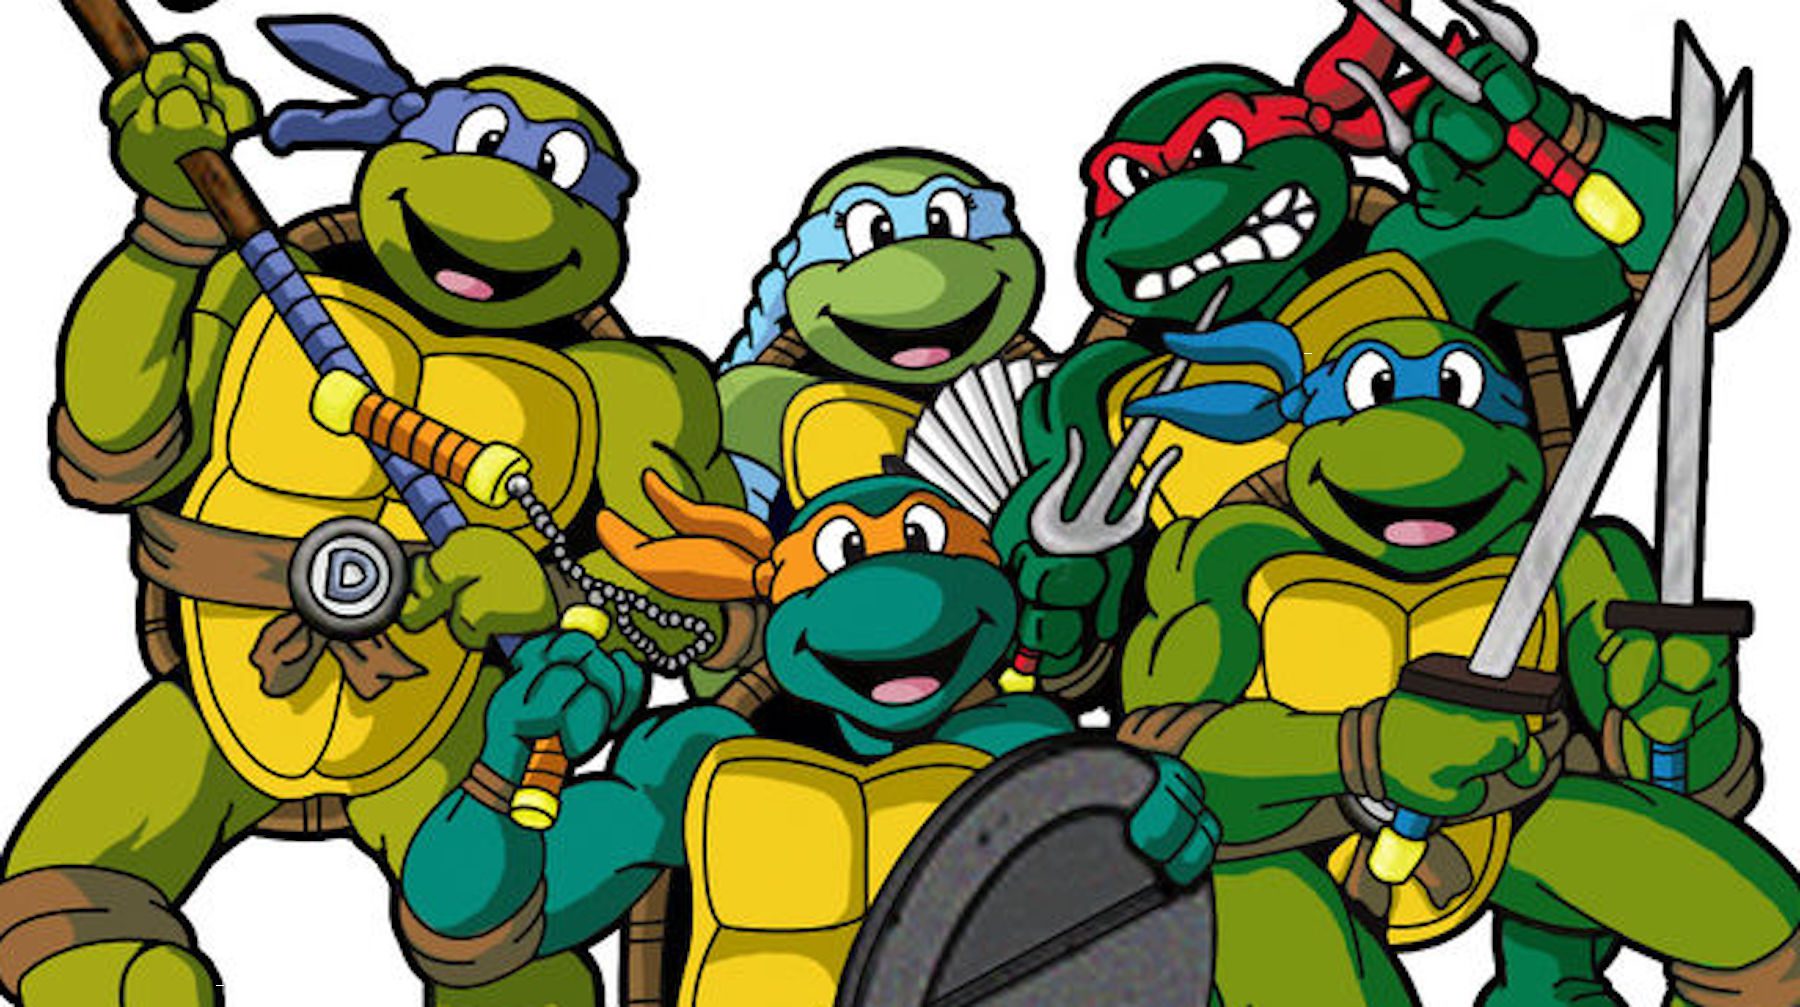 Leonardo, Michelangelo, Donatello, and Raphael from Teenage Mutant Ninja Turtles as they appeared in the original 80s version of their cartoons, smiling and posing with weapons.